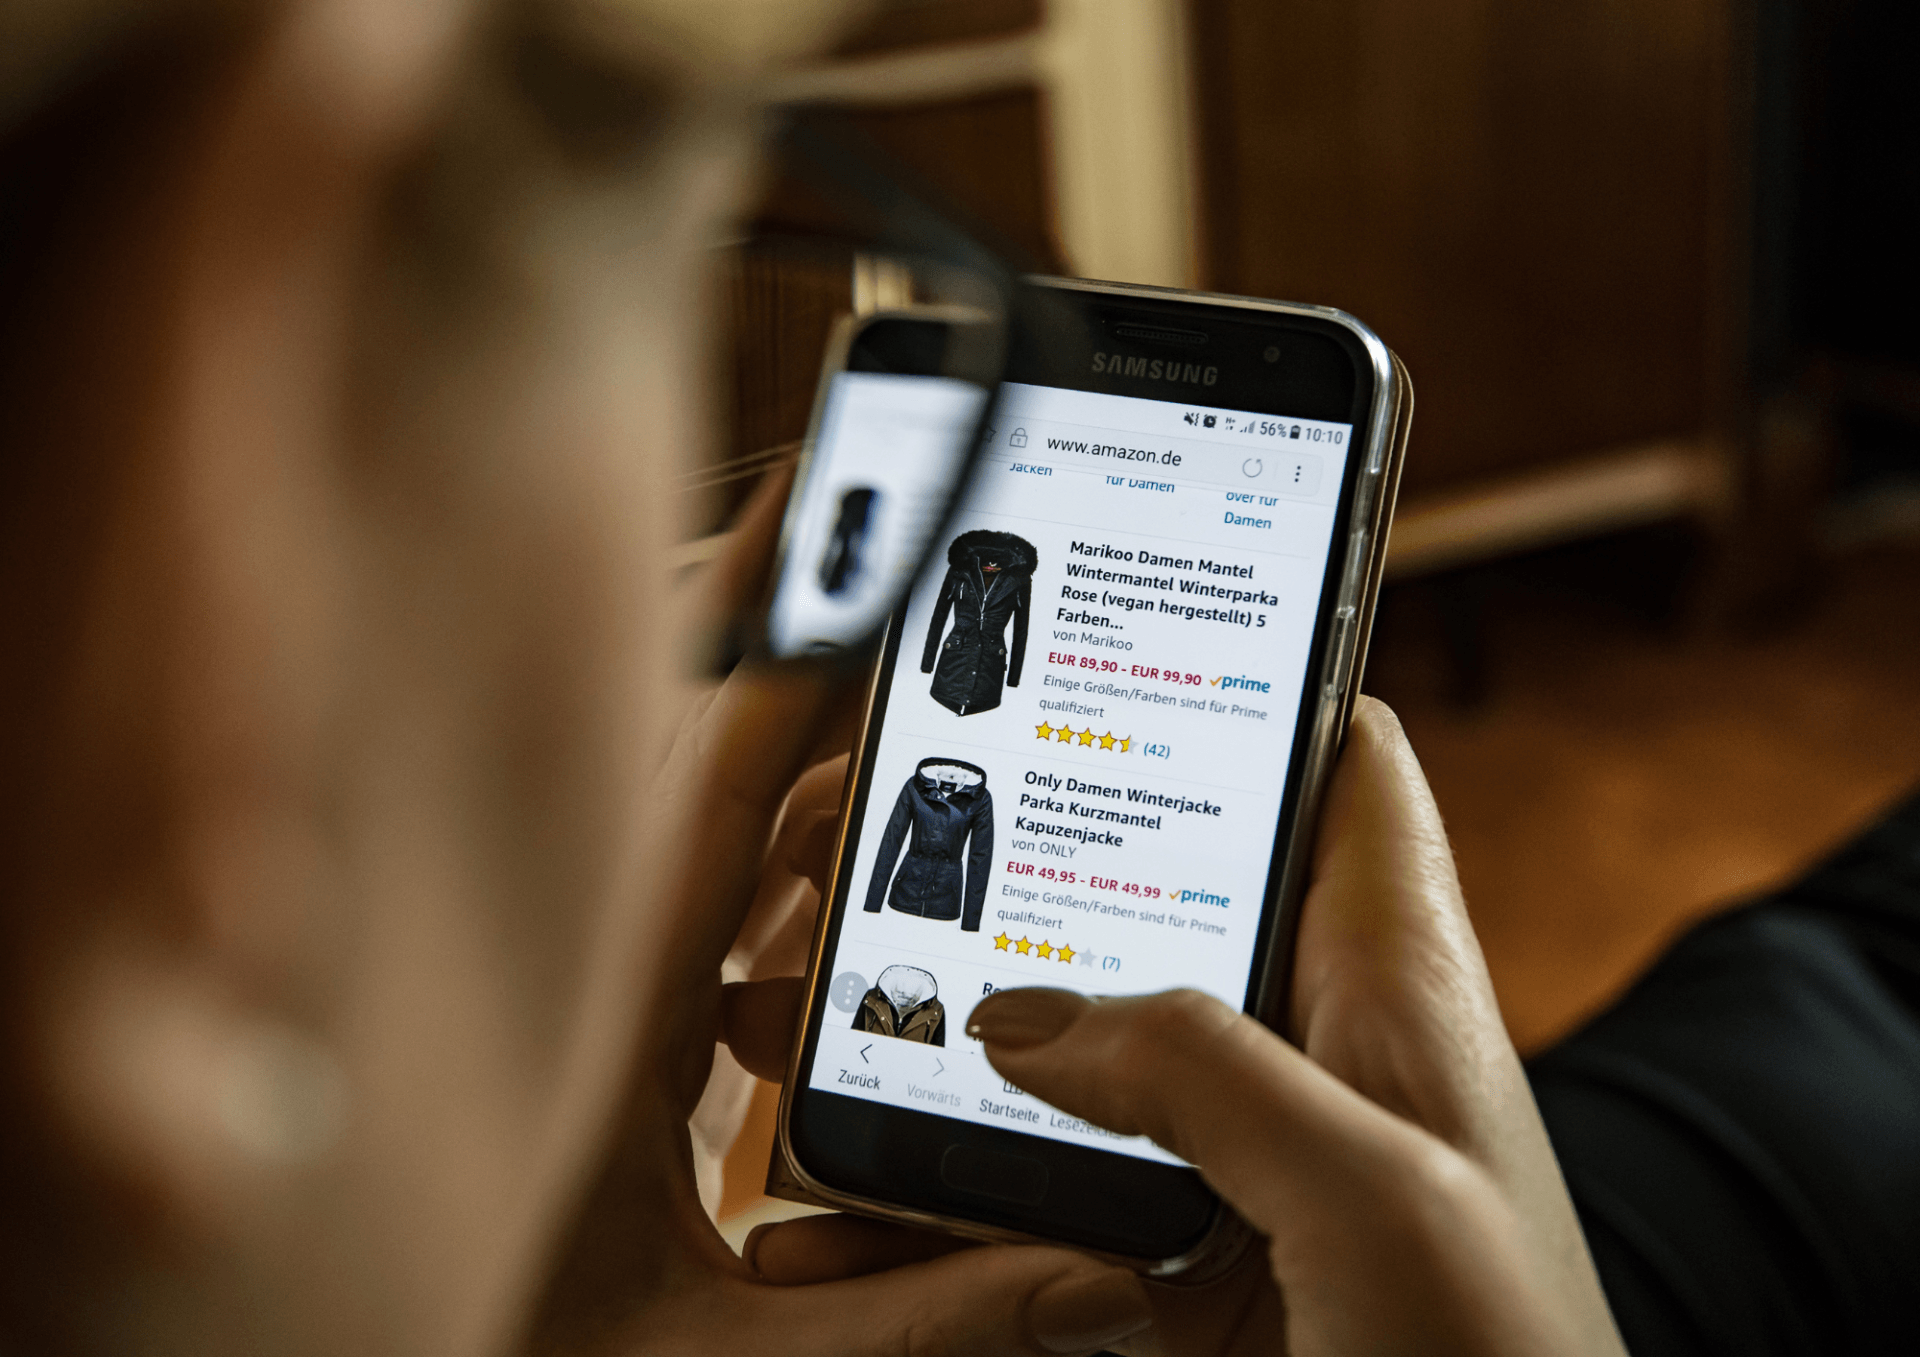 WHAT IS eCOMMERCE?